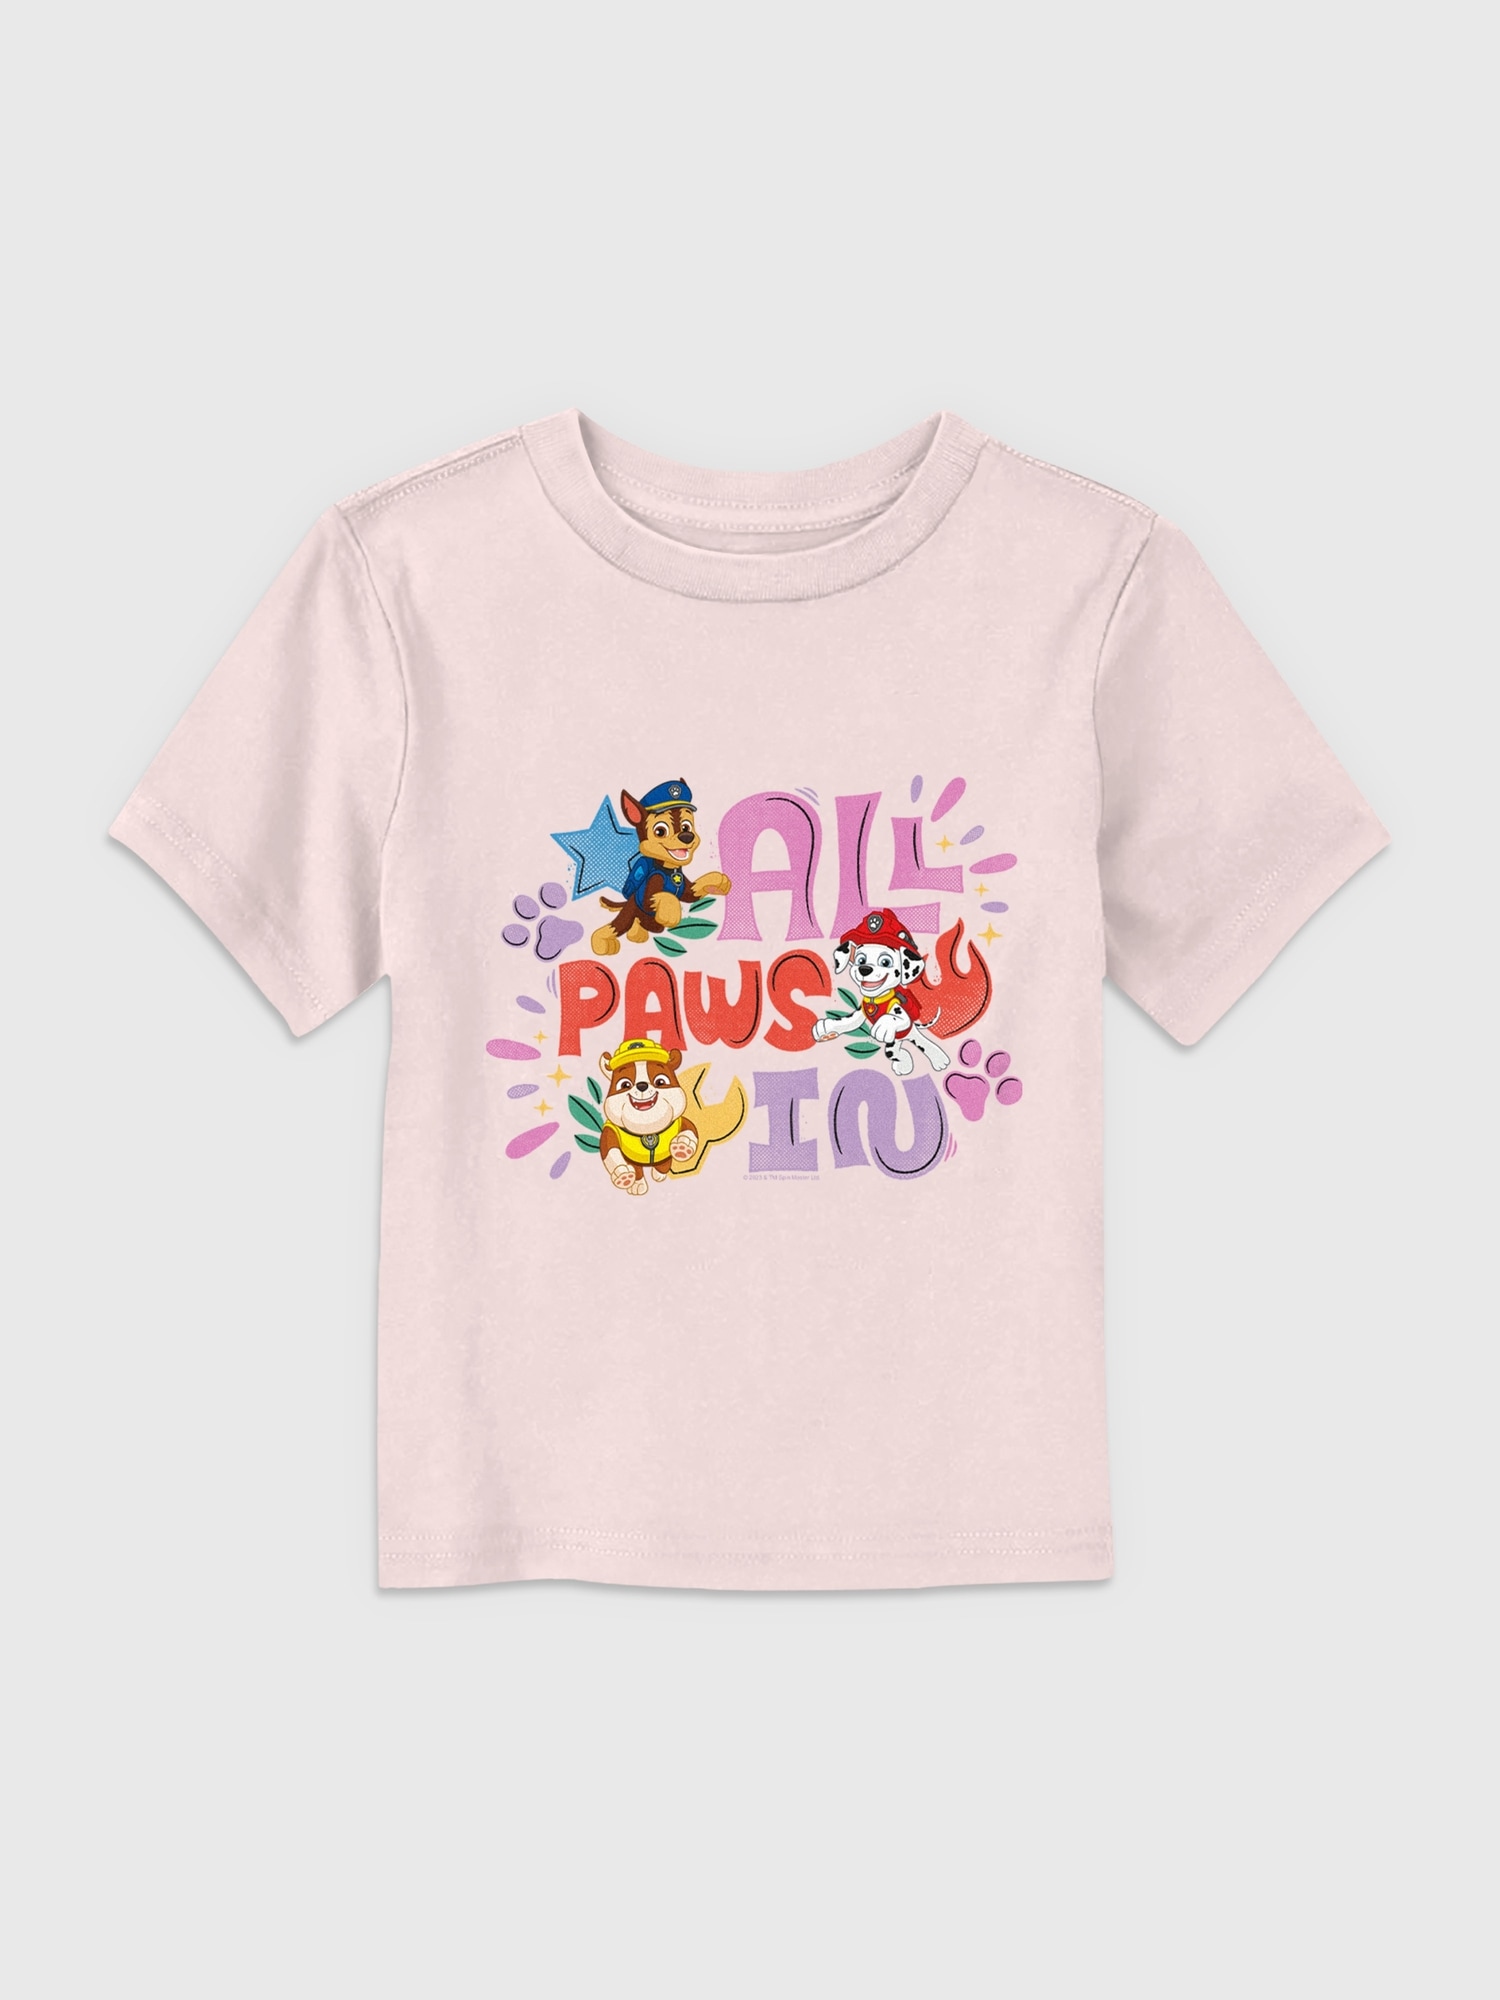 Paws Patrol Tee Gap PAW In Toddler Graphic All |